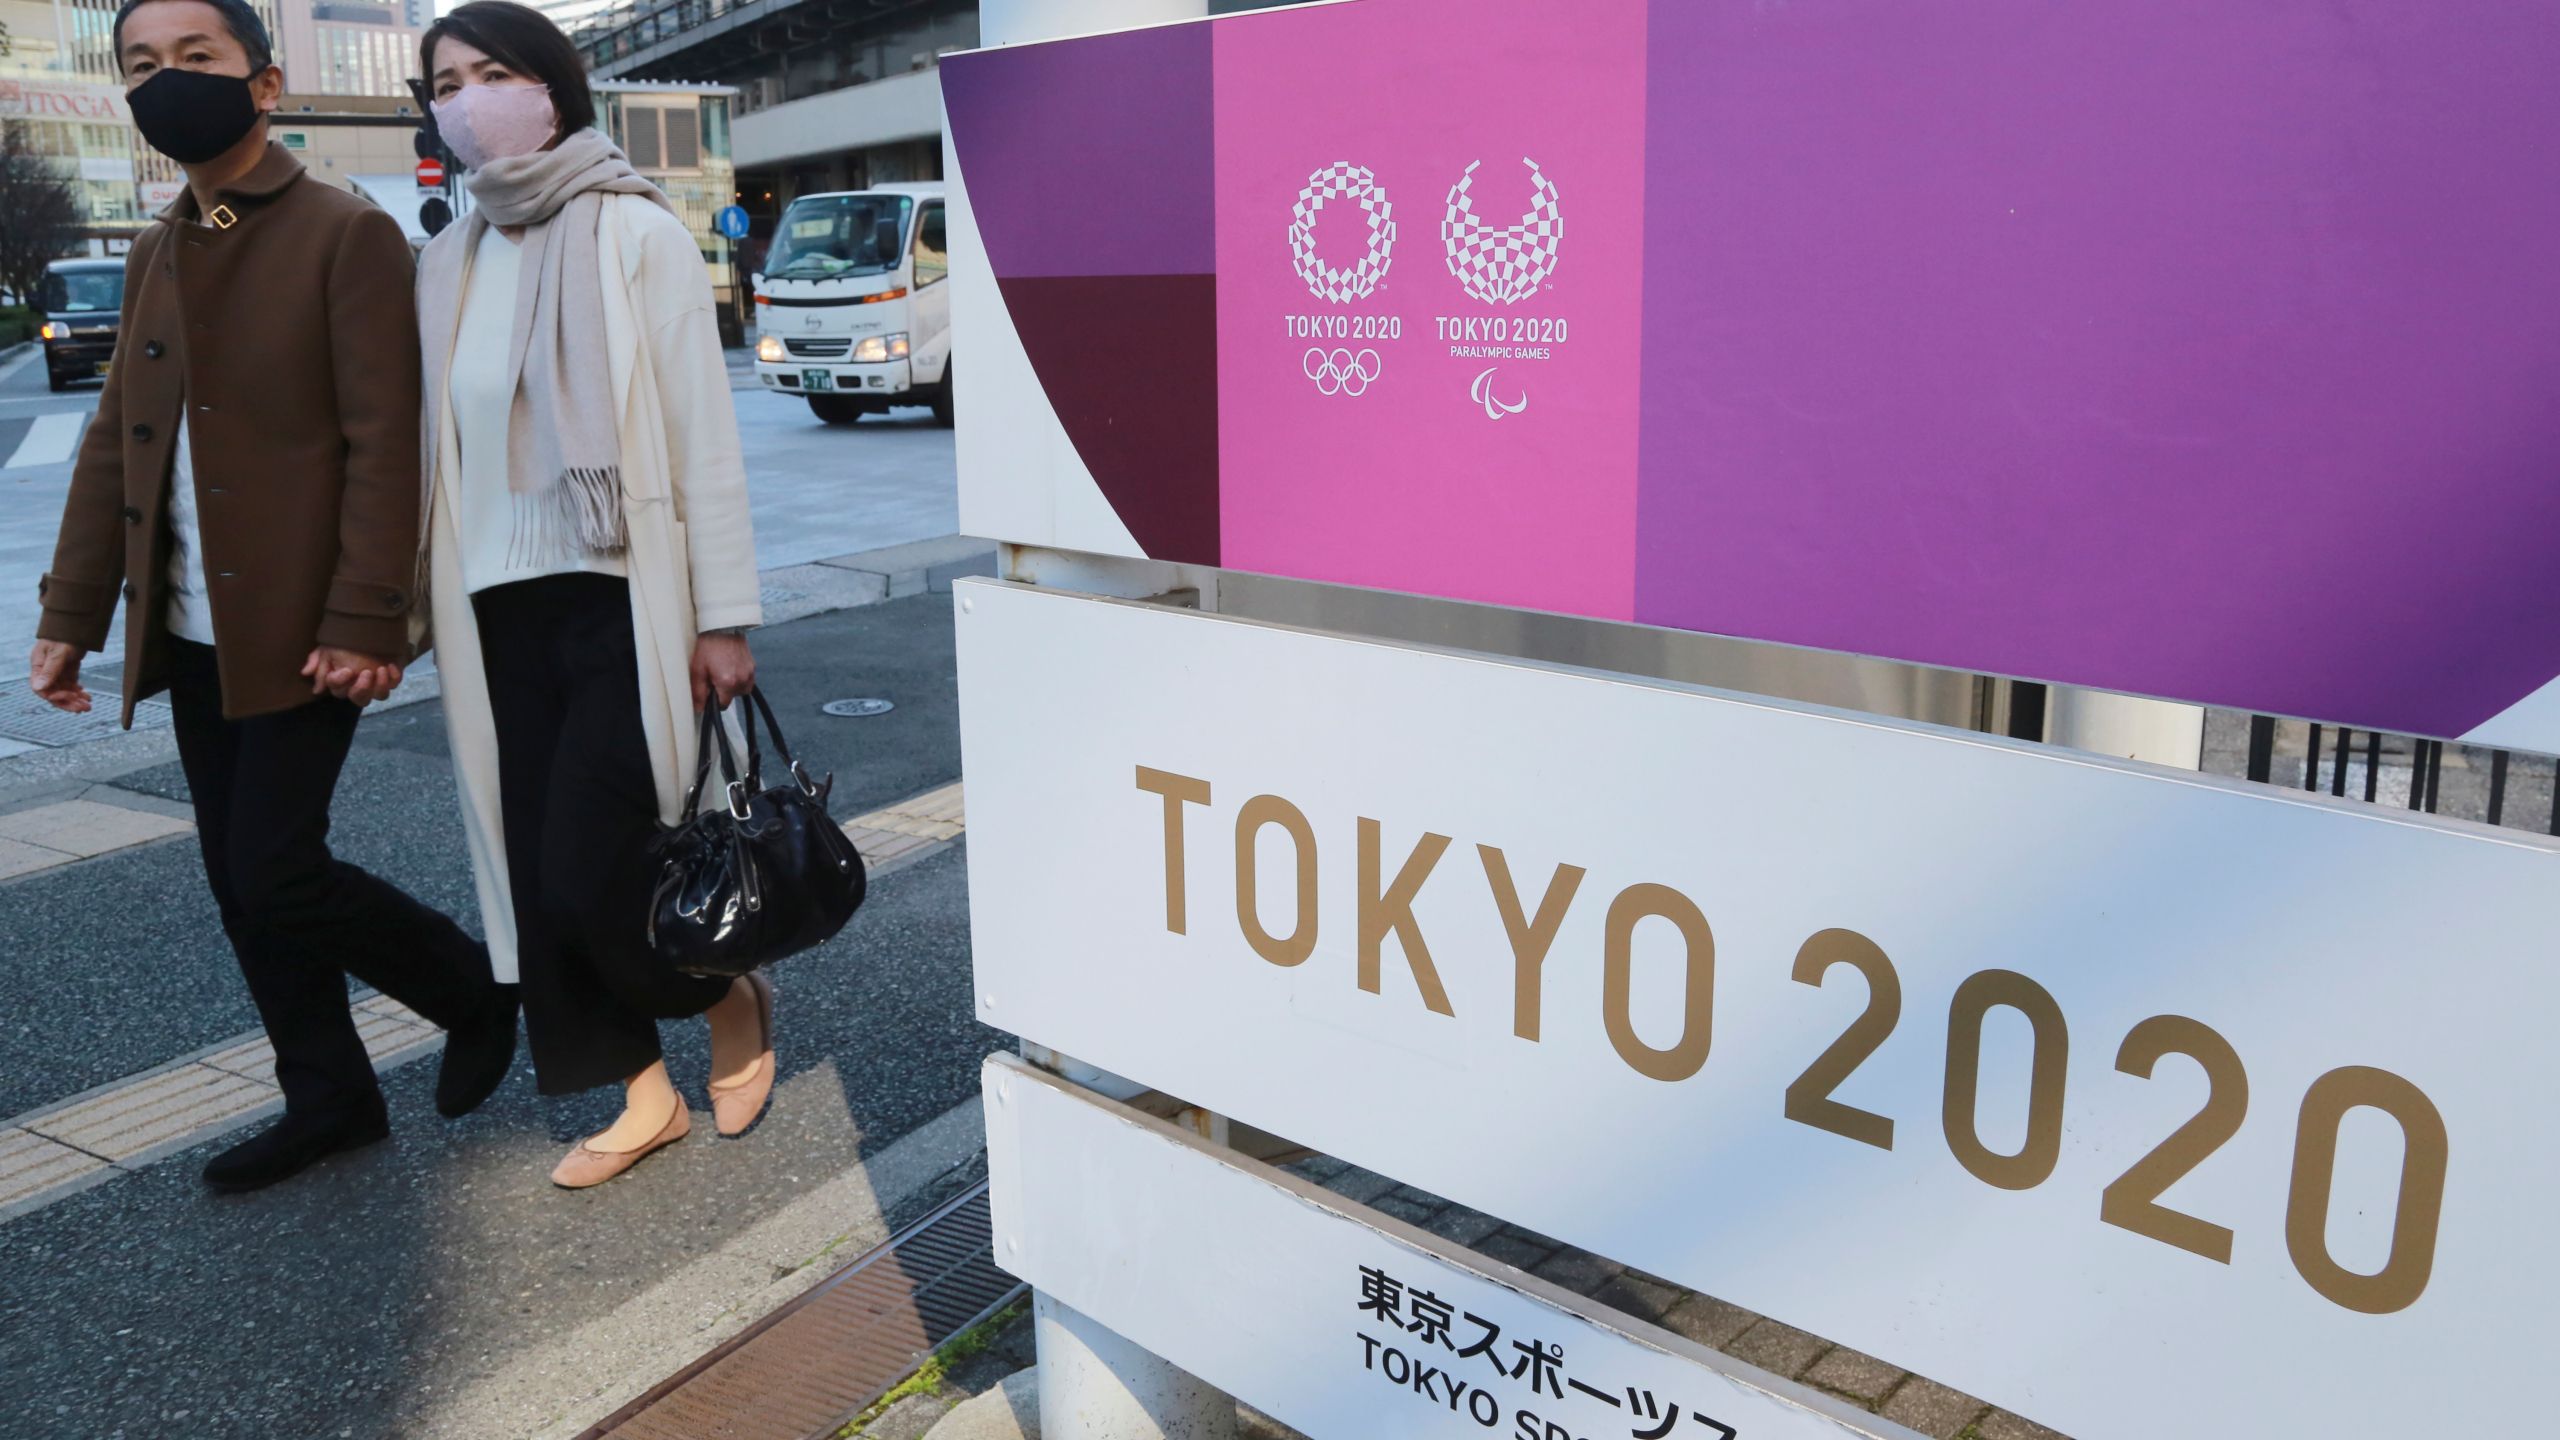 Tokyo Olympics to pick Mori replacement; is a woman likely?. KRQE News 13